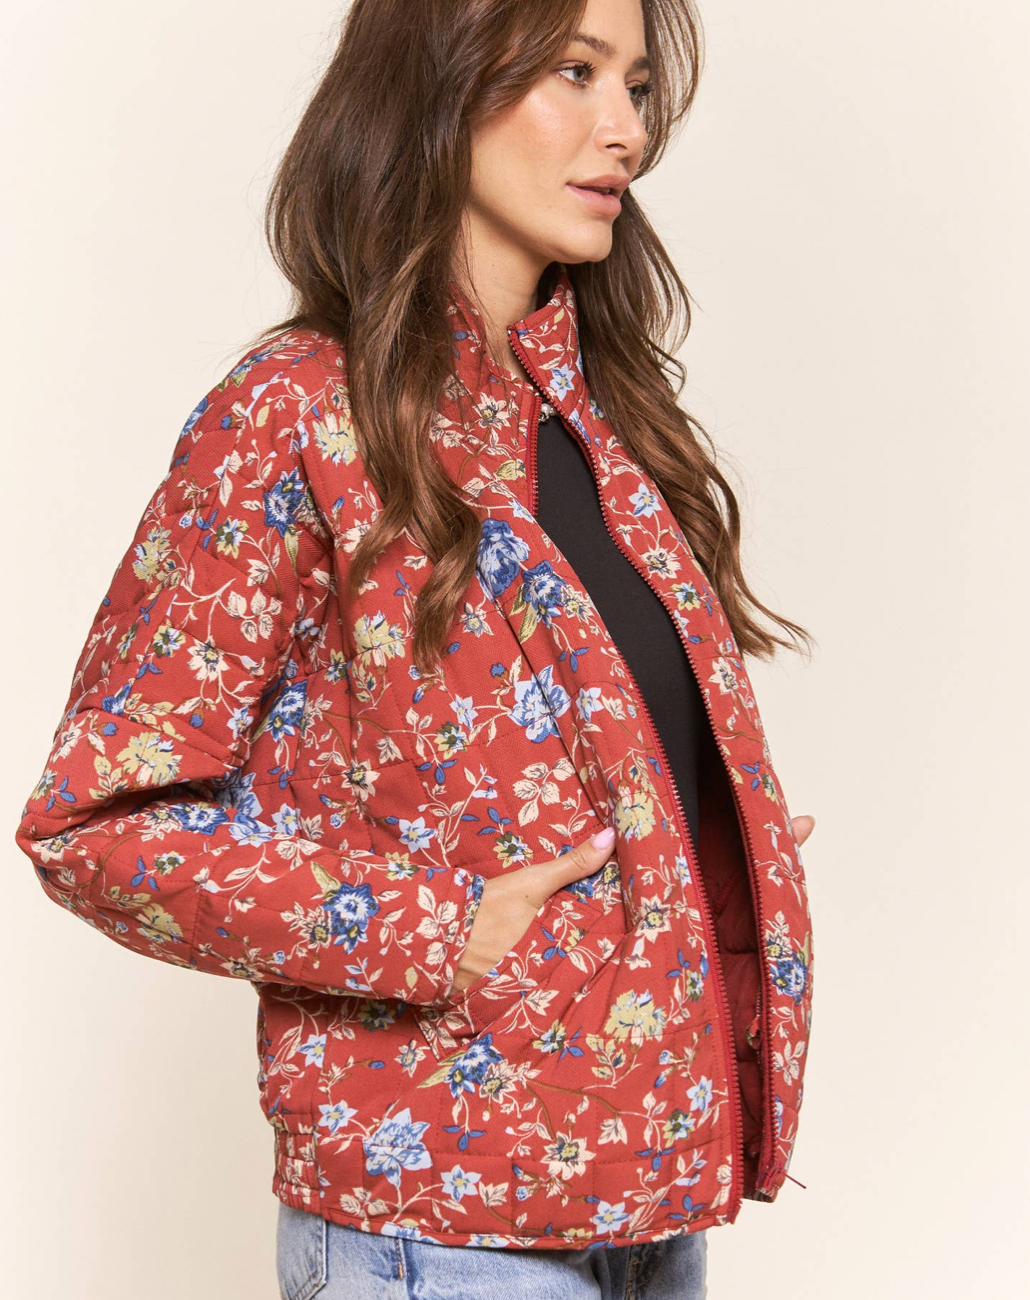 Quilted floral jacket